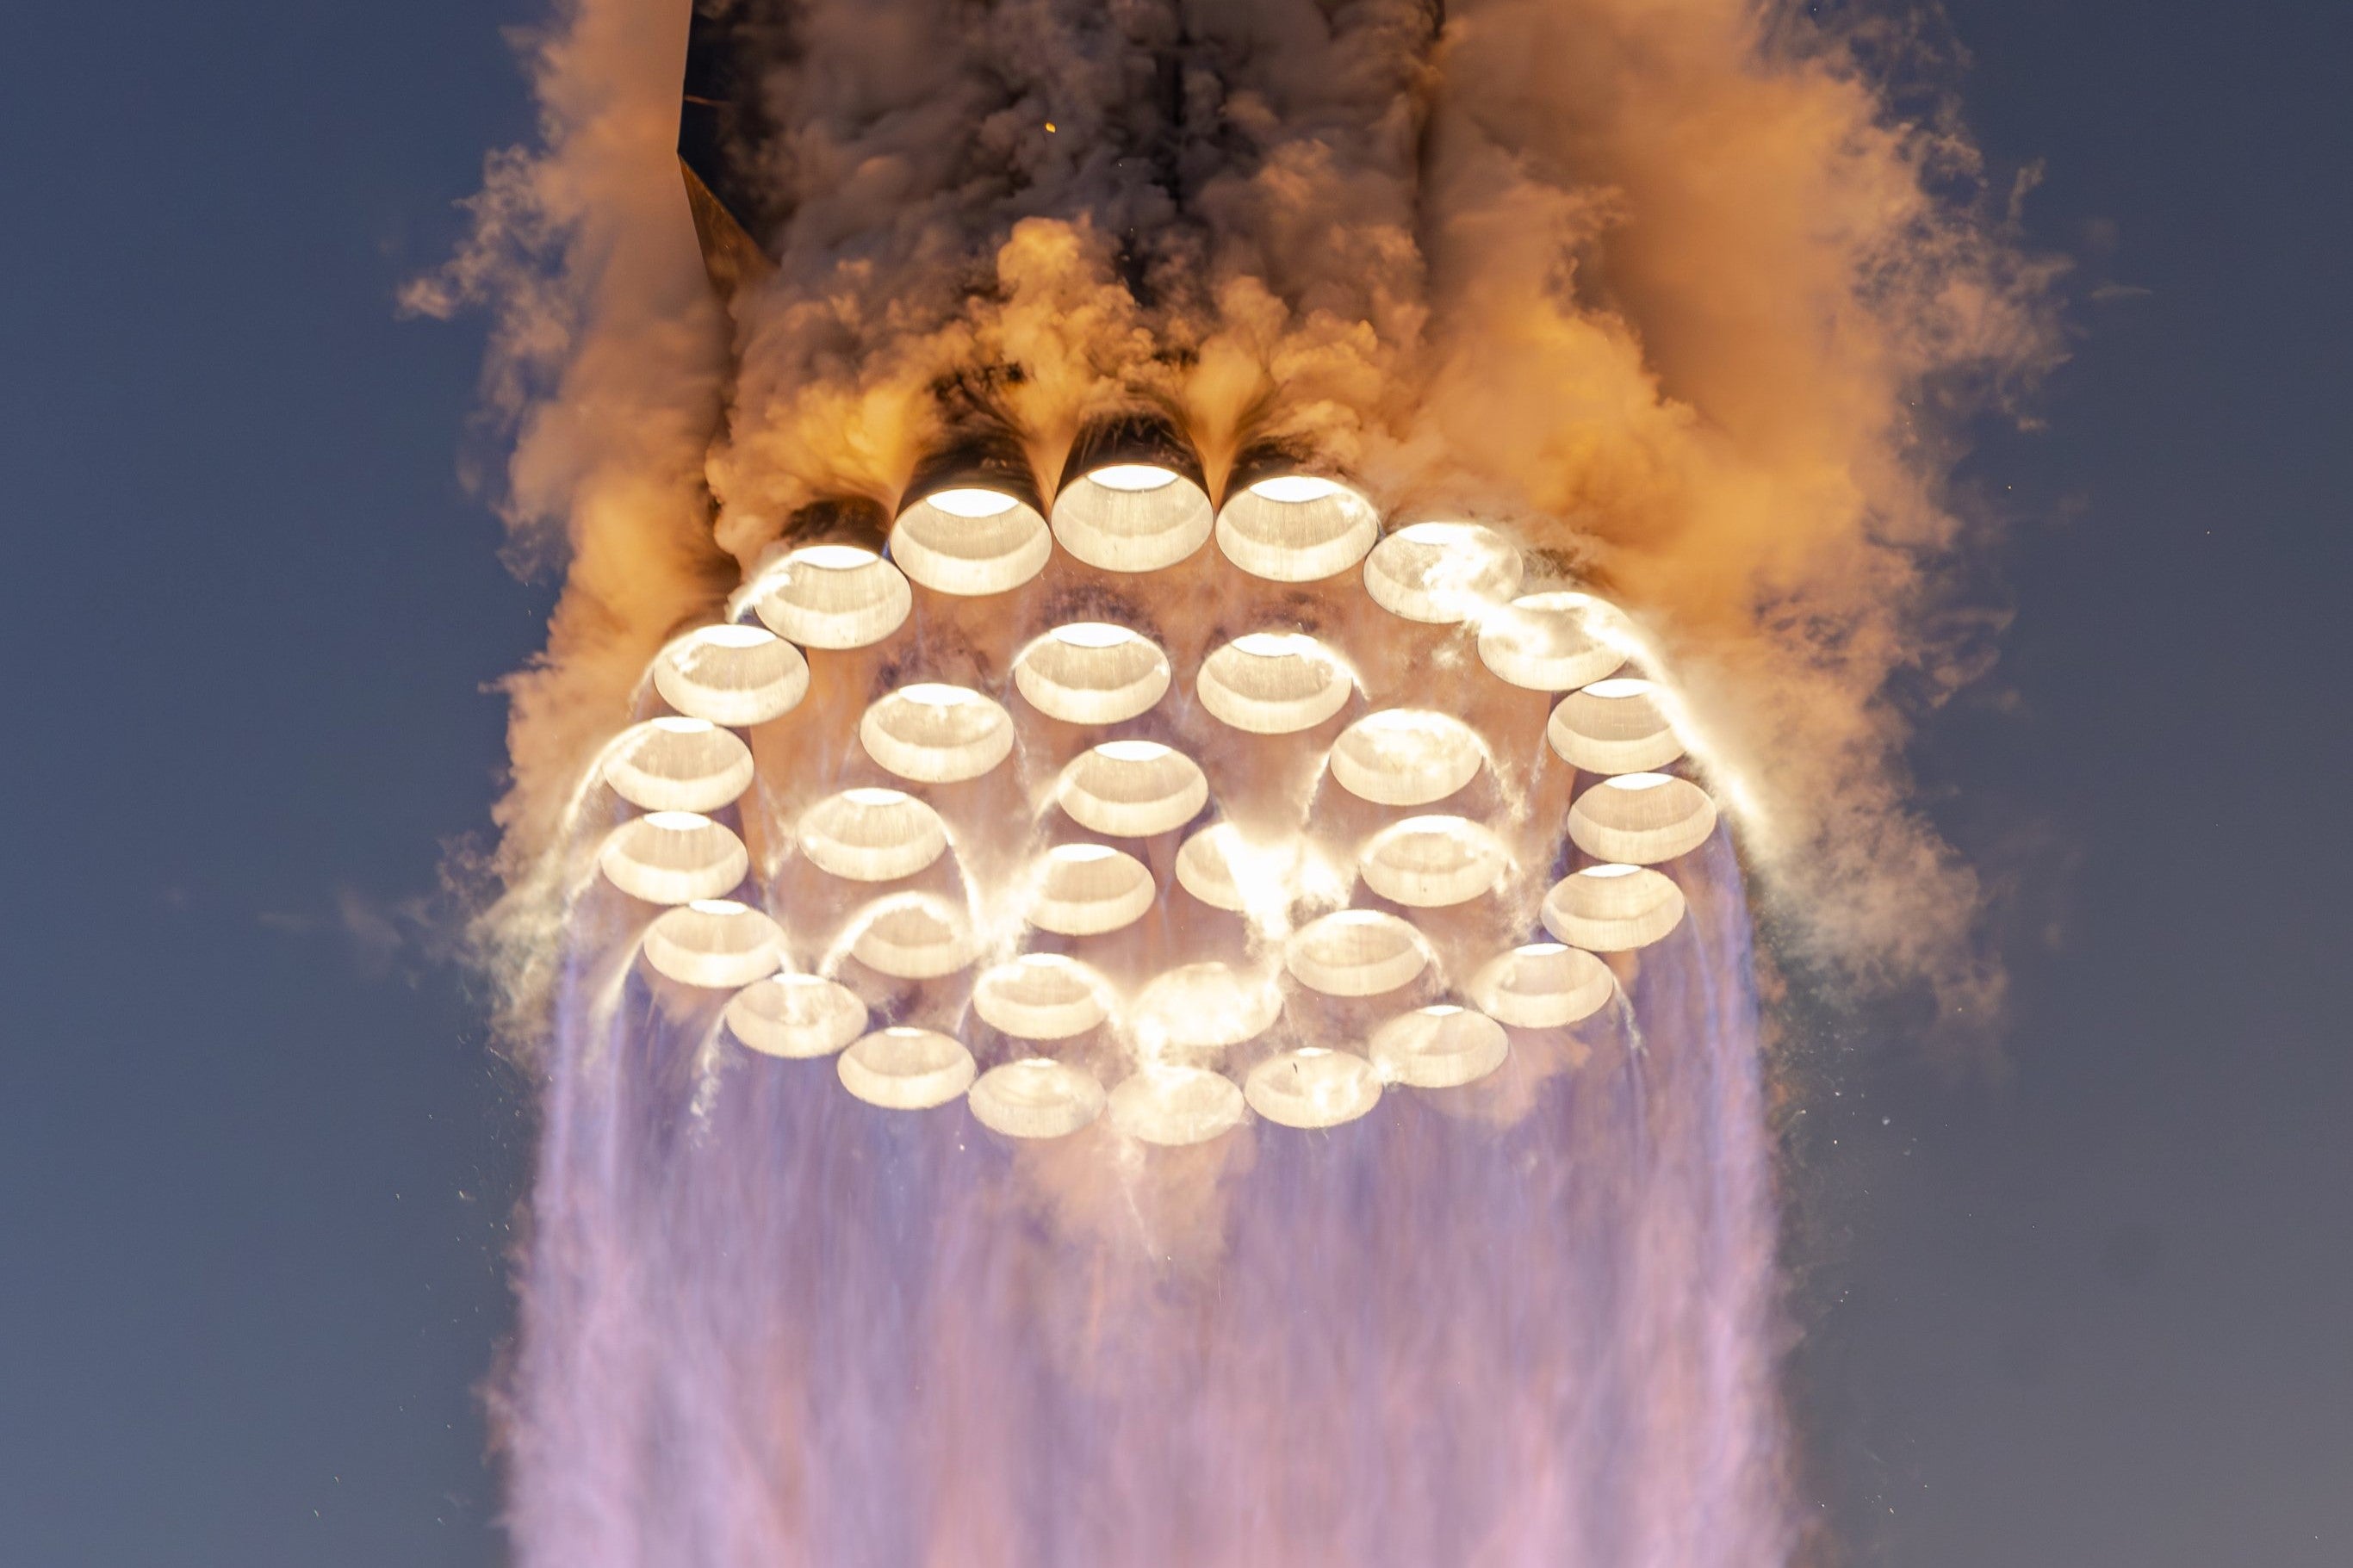 The 33 Raptor engines of SpaceX’s Starship rocket during a test launch on 18 November, 2023